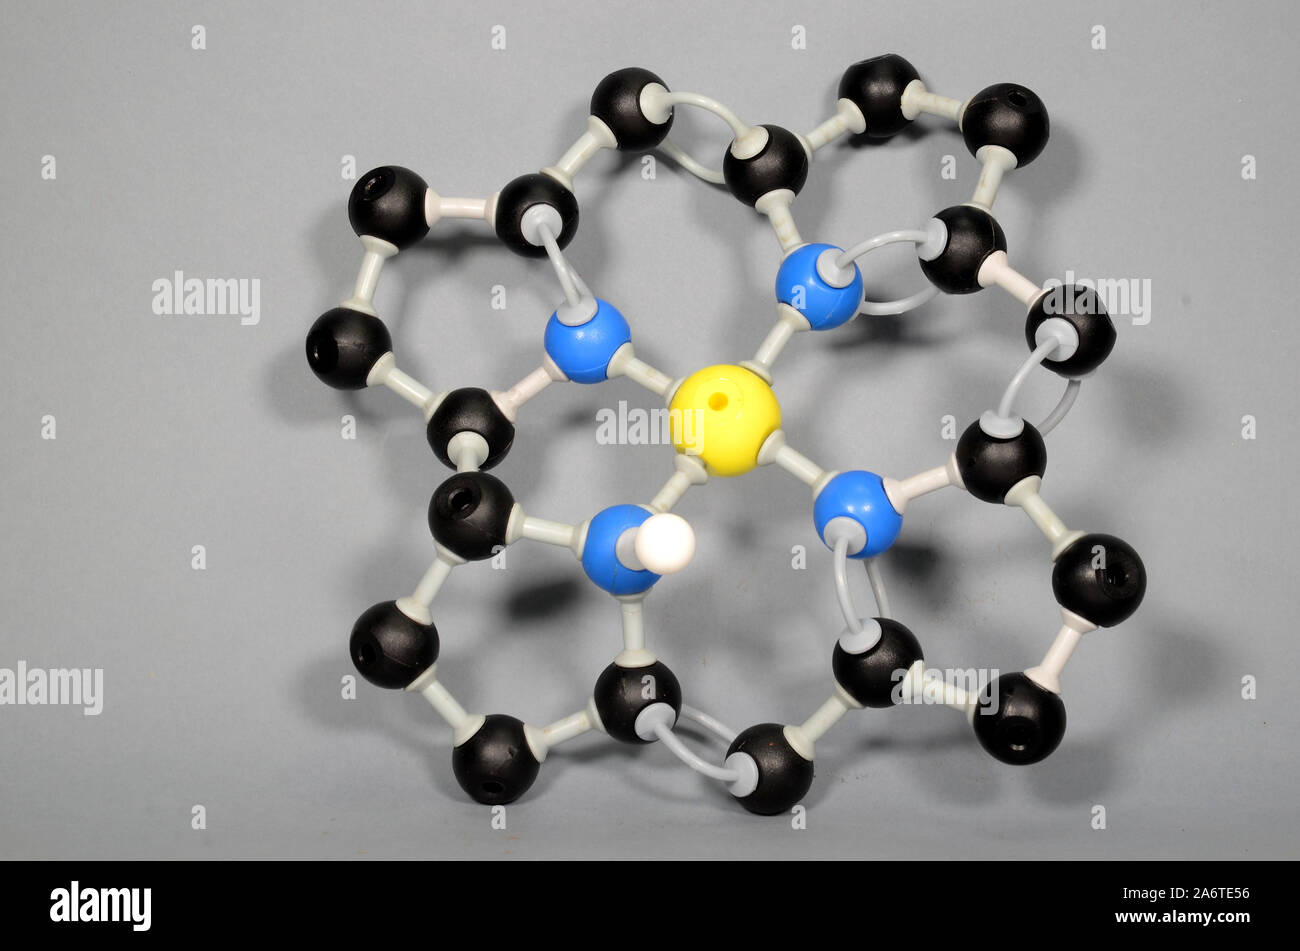 Molecule Model of a Corrin Ring. Black is Carbon, Blue is Nitrogen, Yellow may represent Cobalt or Iron. Stock Photo